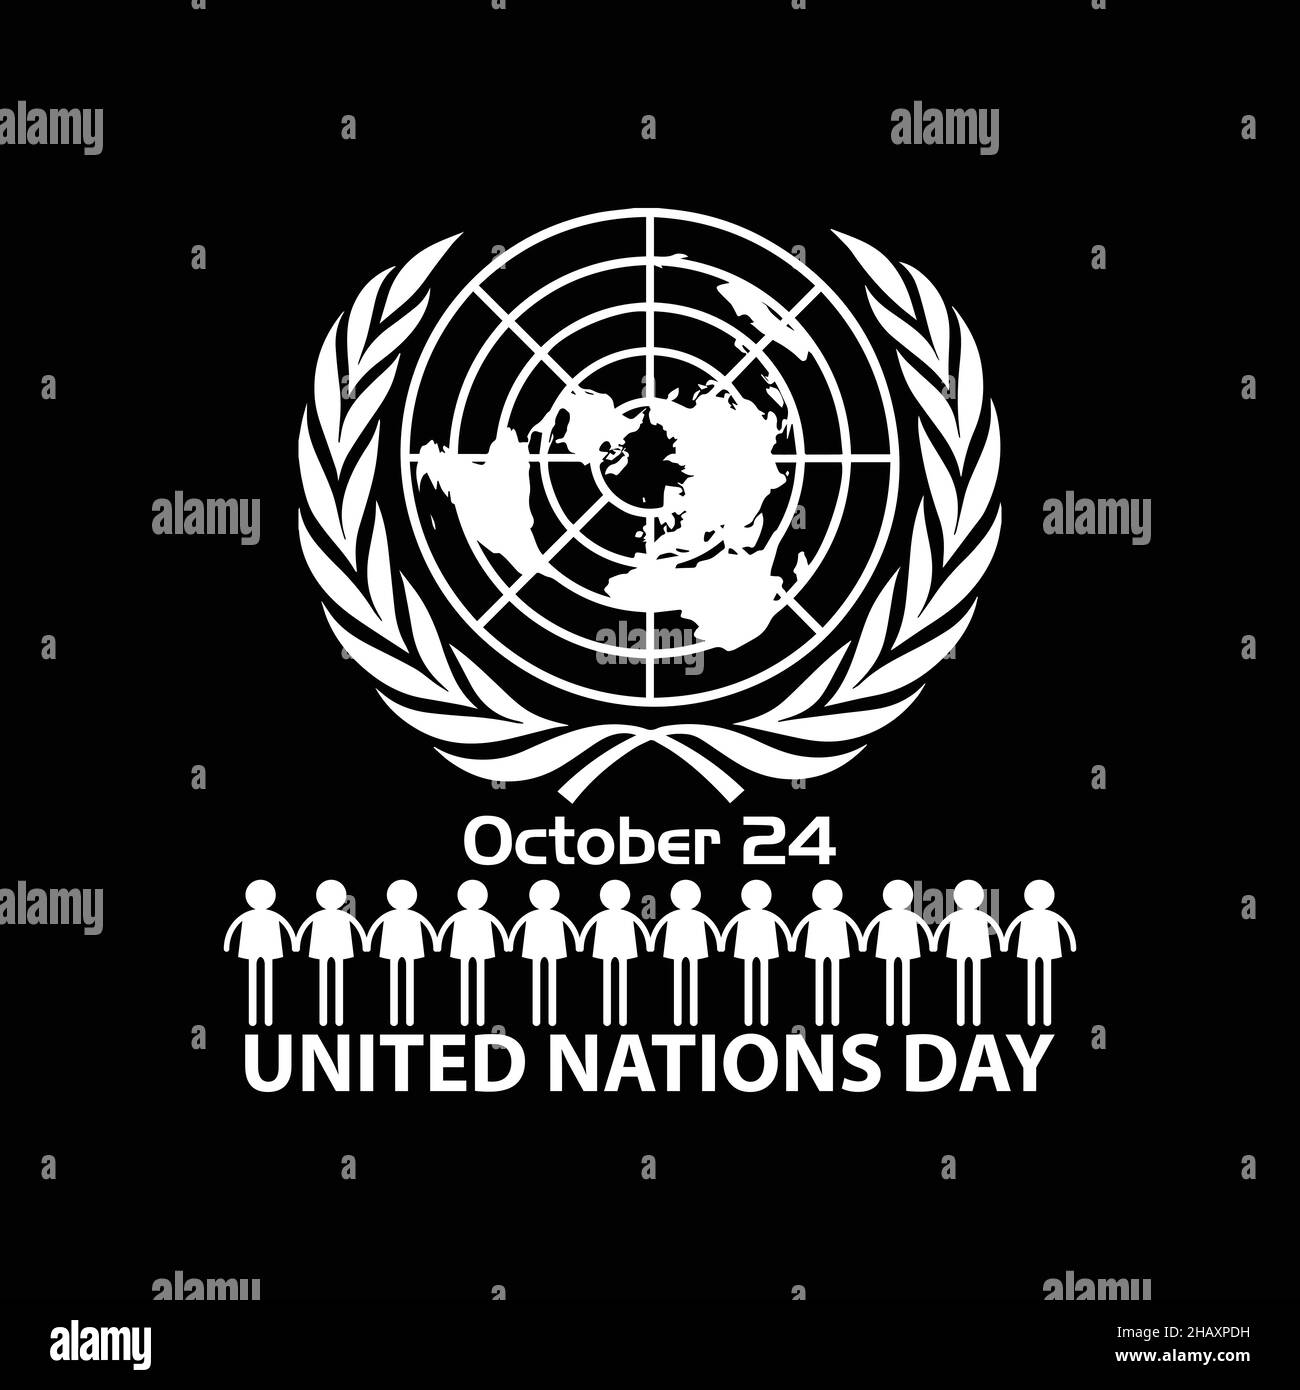 October 24 United nations day. Vector image of united nations day Stock Vector